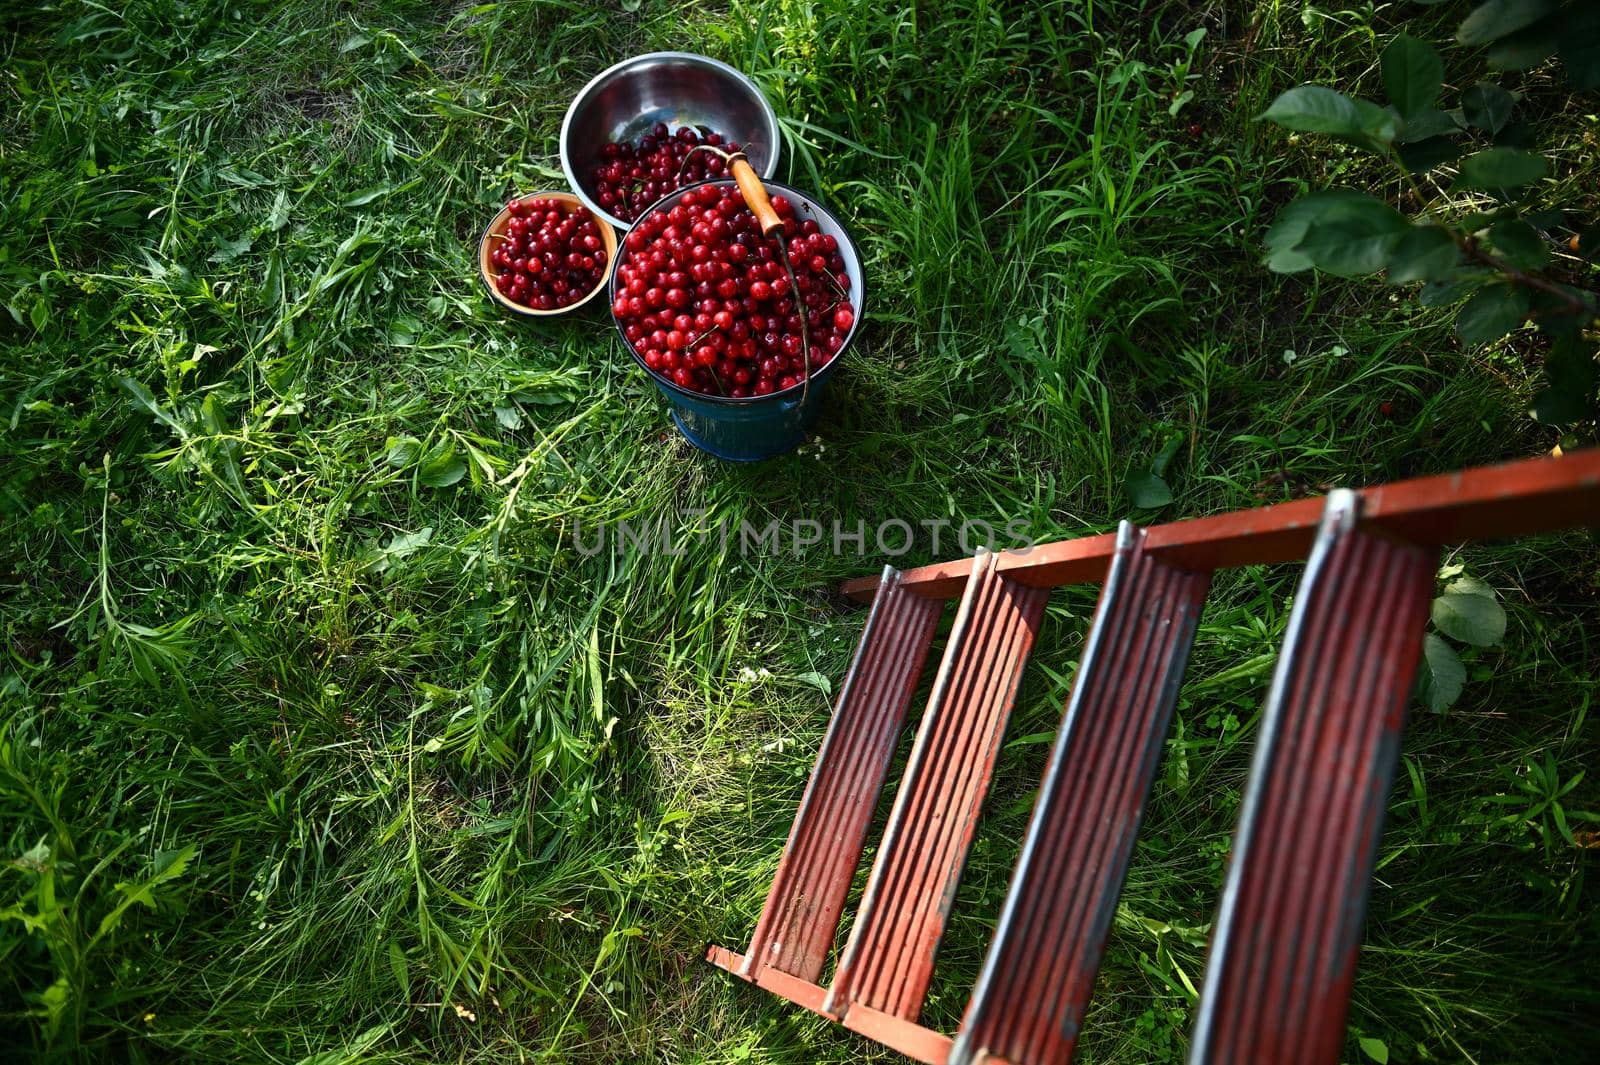 Top view of stepladder on harvest cherries in metal blue bucket and bowls, lying on a green grass in orchard